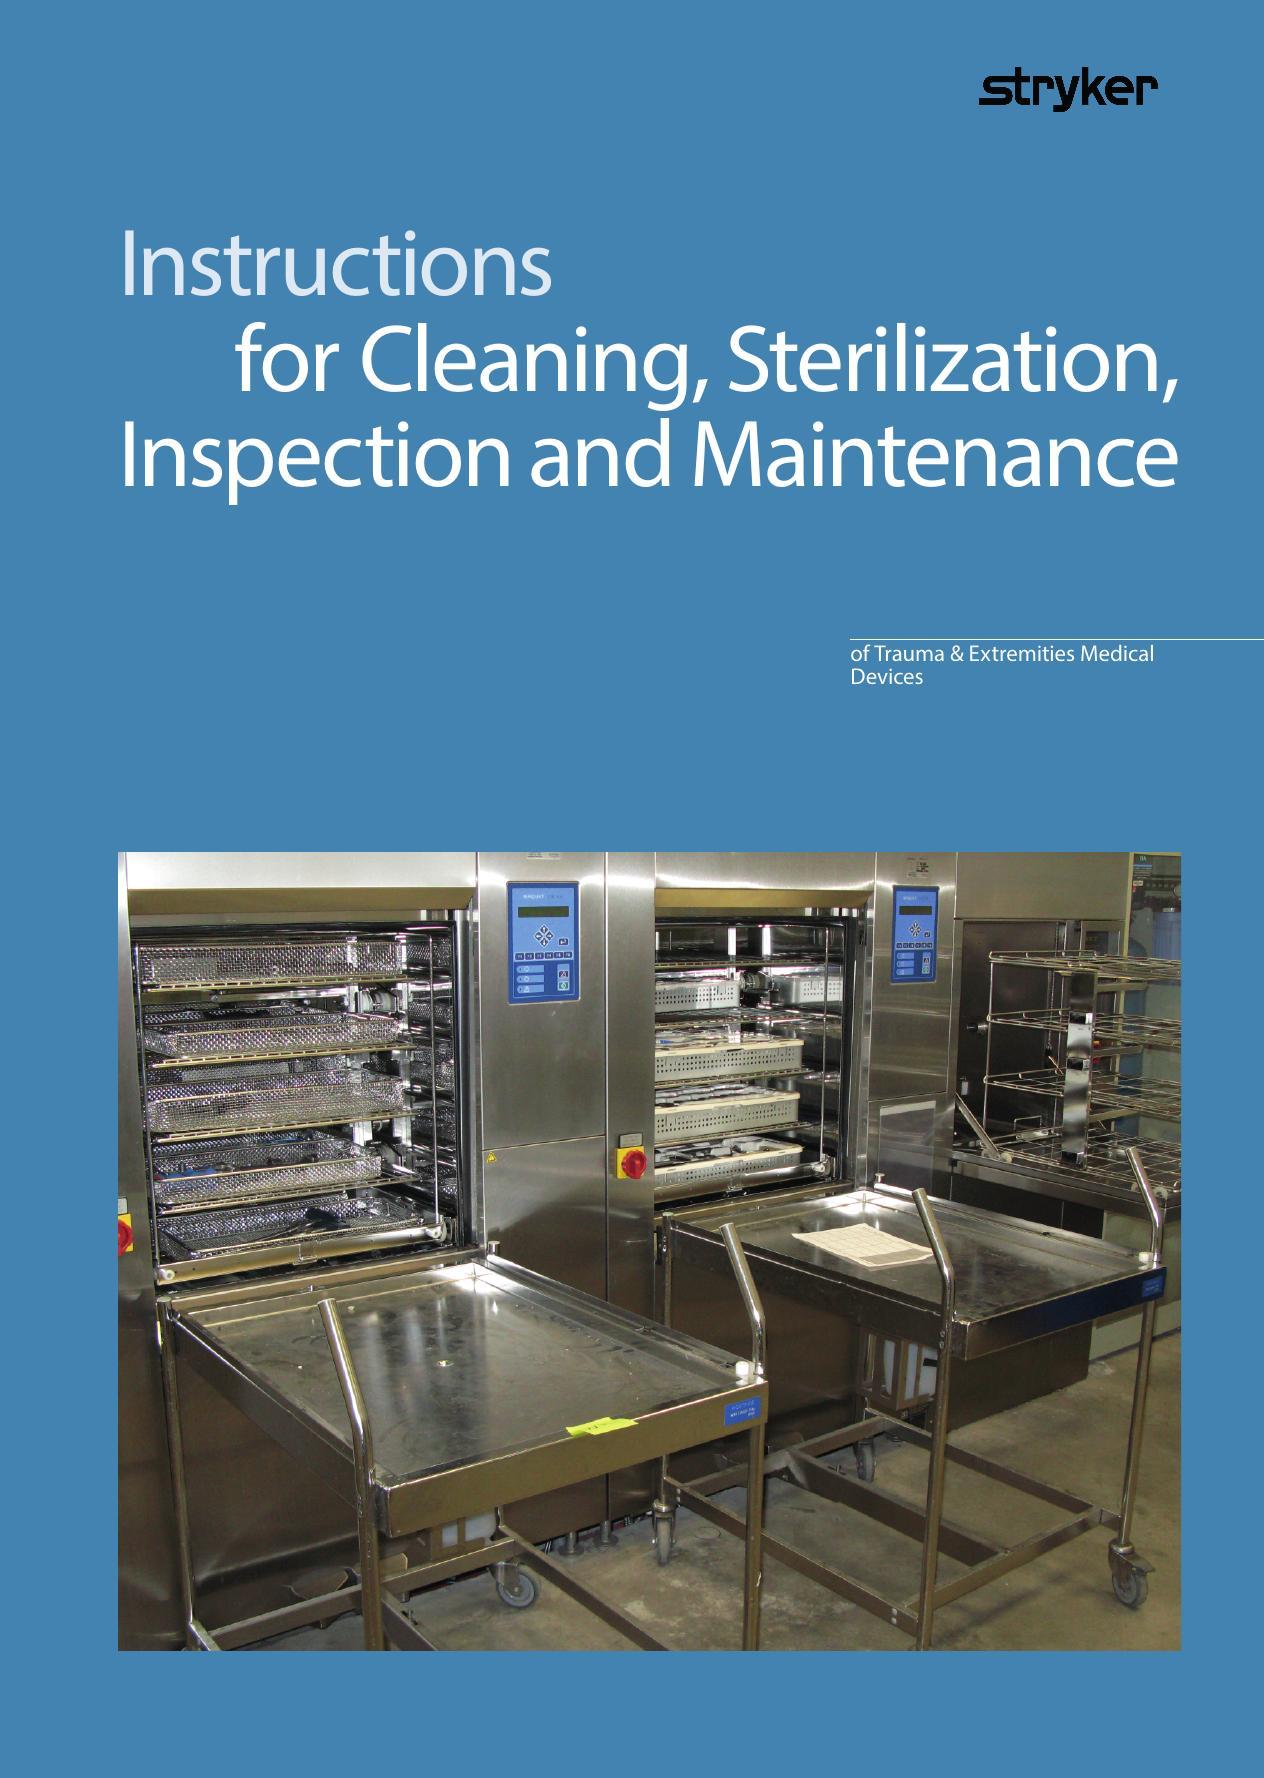 instructions-for-cleaning-sterilization-inspection-and-maintenance-of-trauma-extremities-medical-devices.pdf